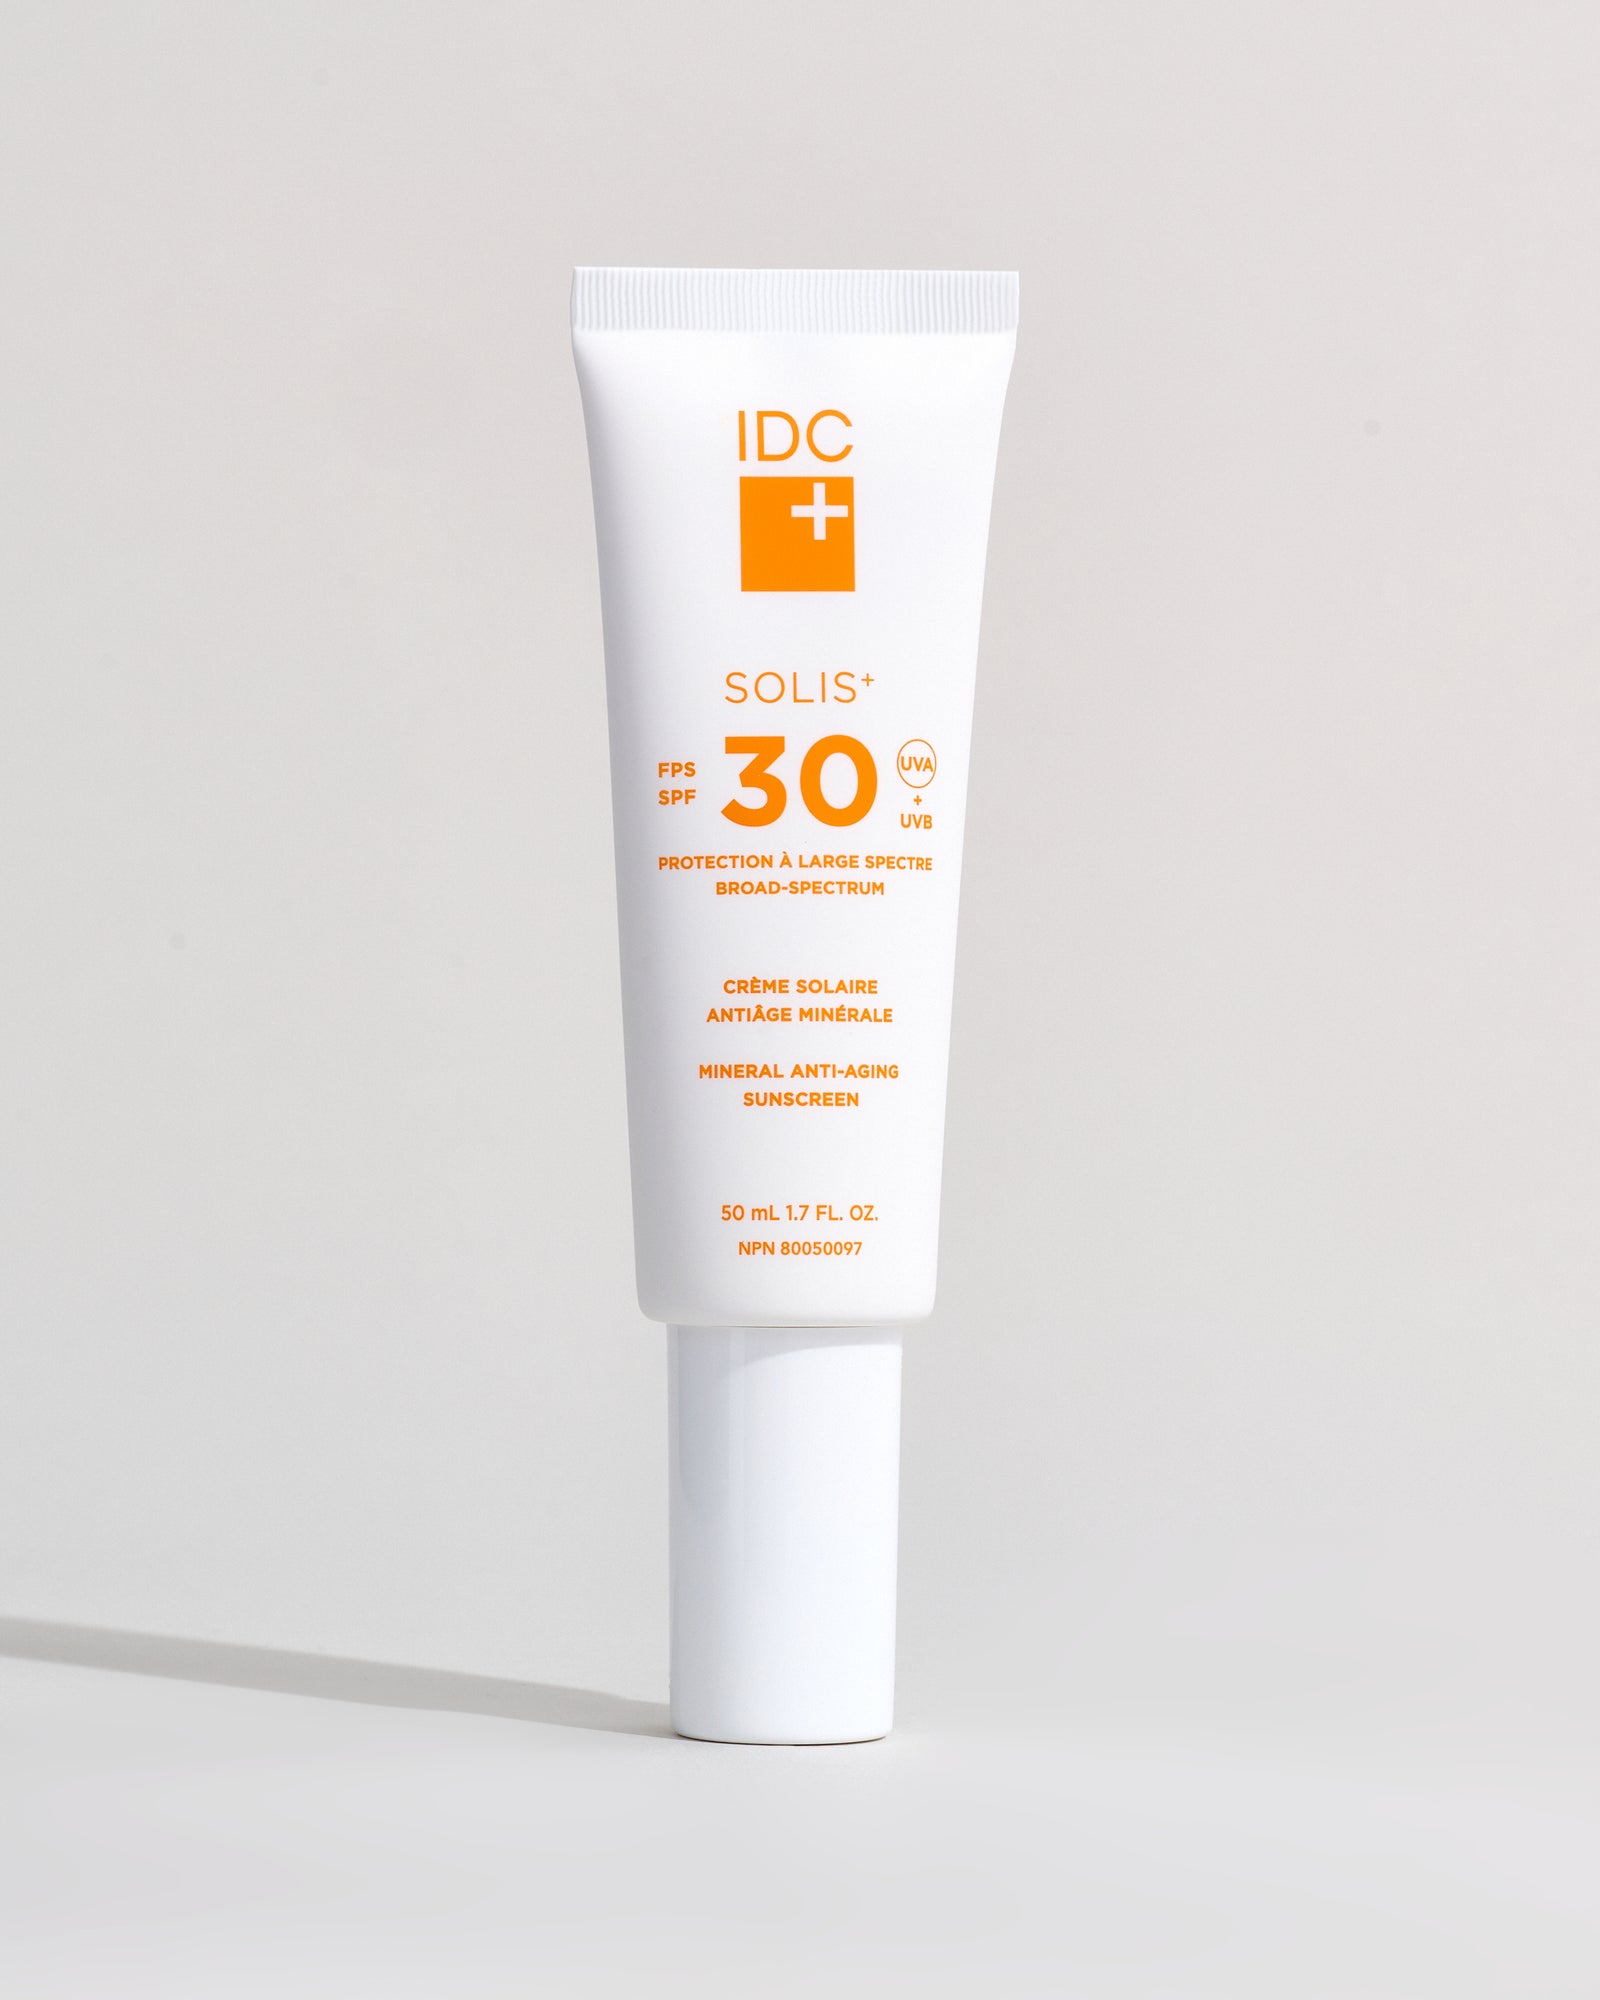 Solis+ SPF 30 | Mineral anti-aging sunscreen